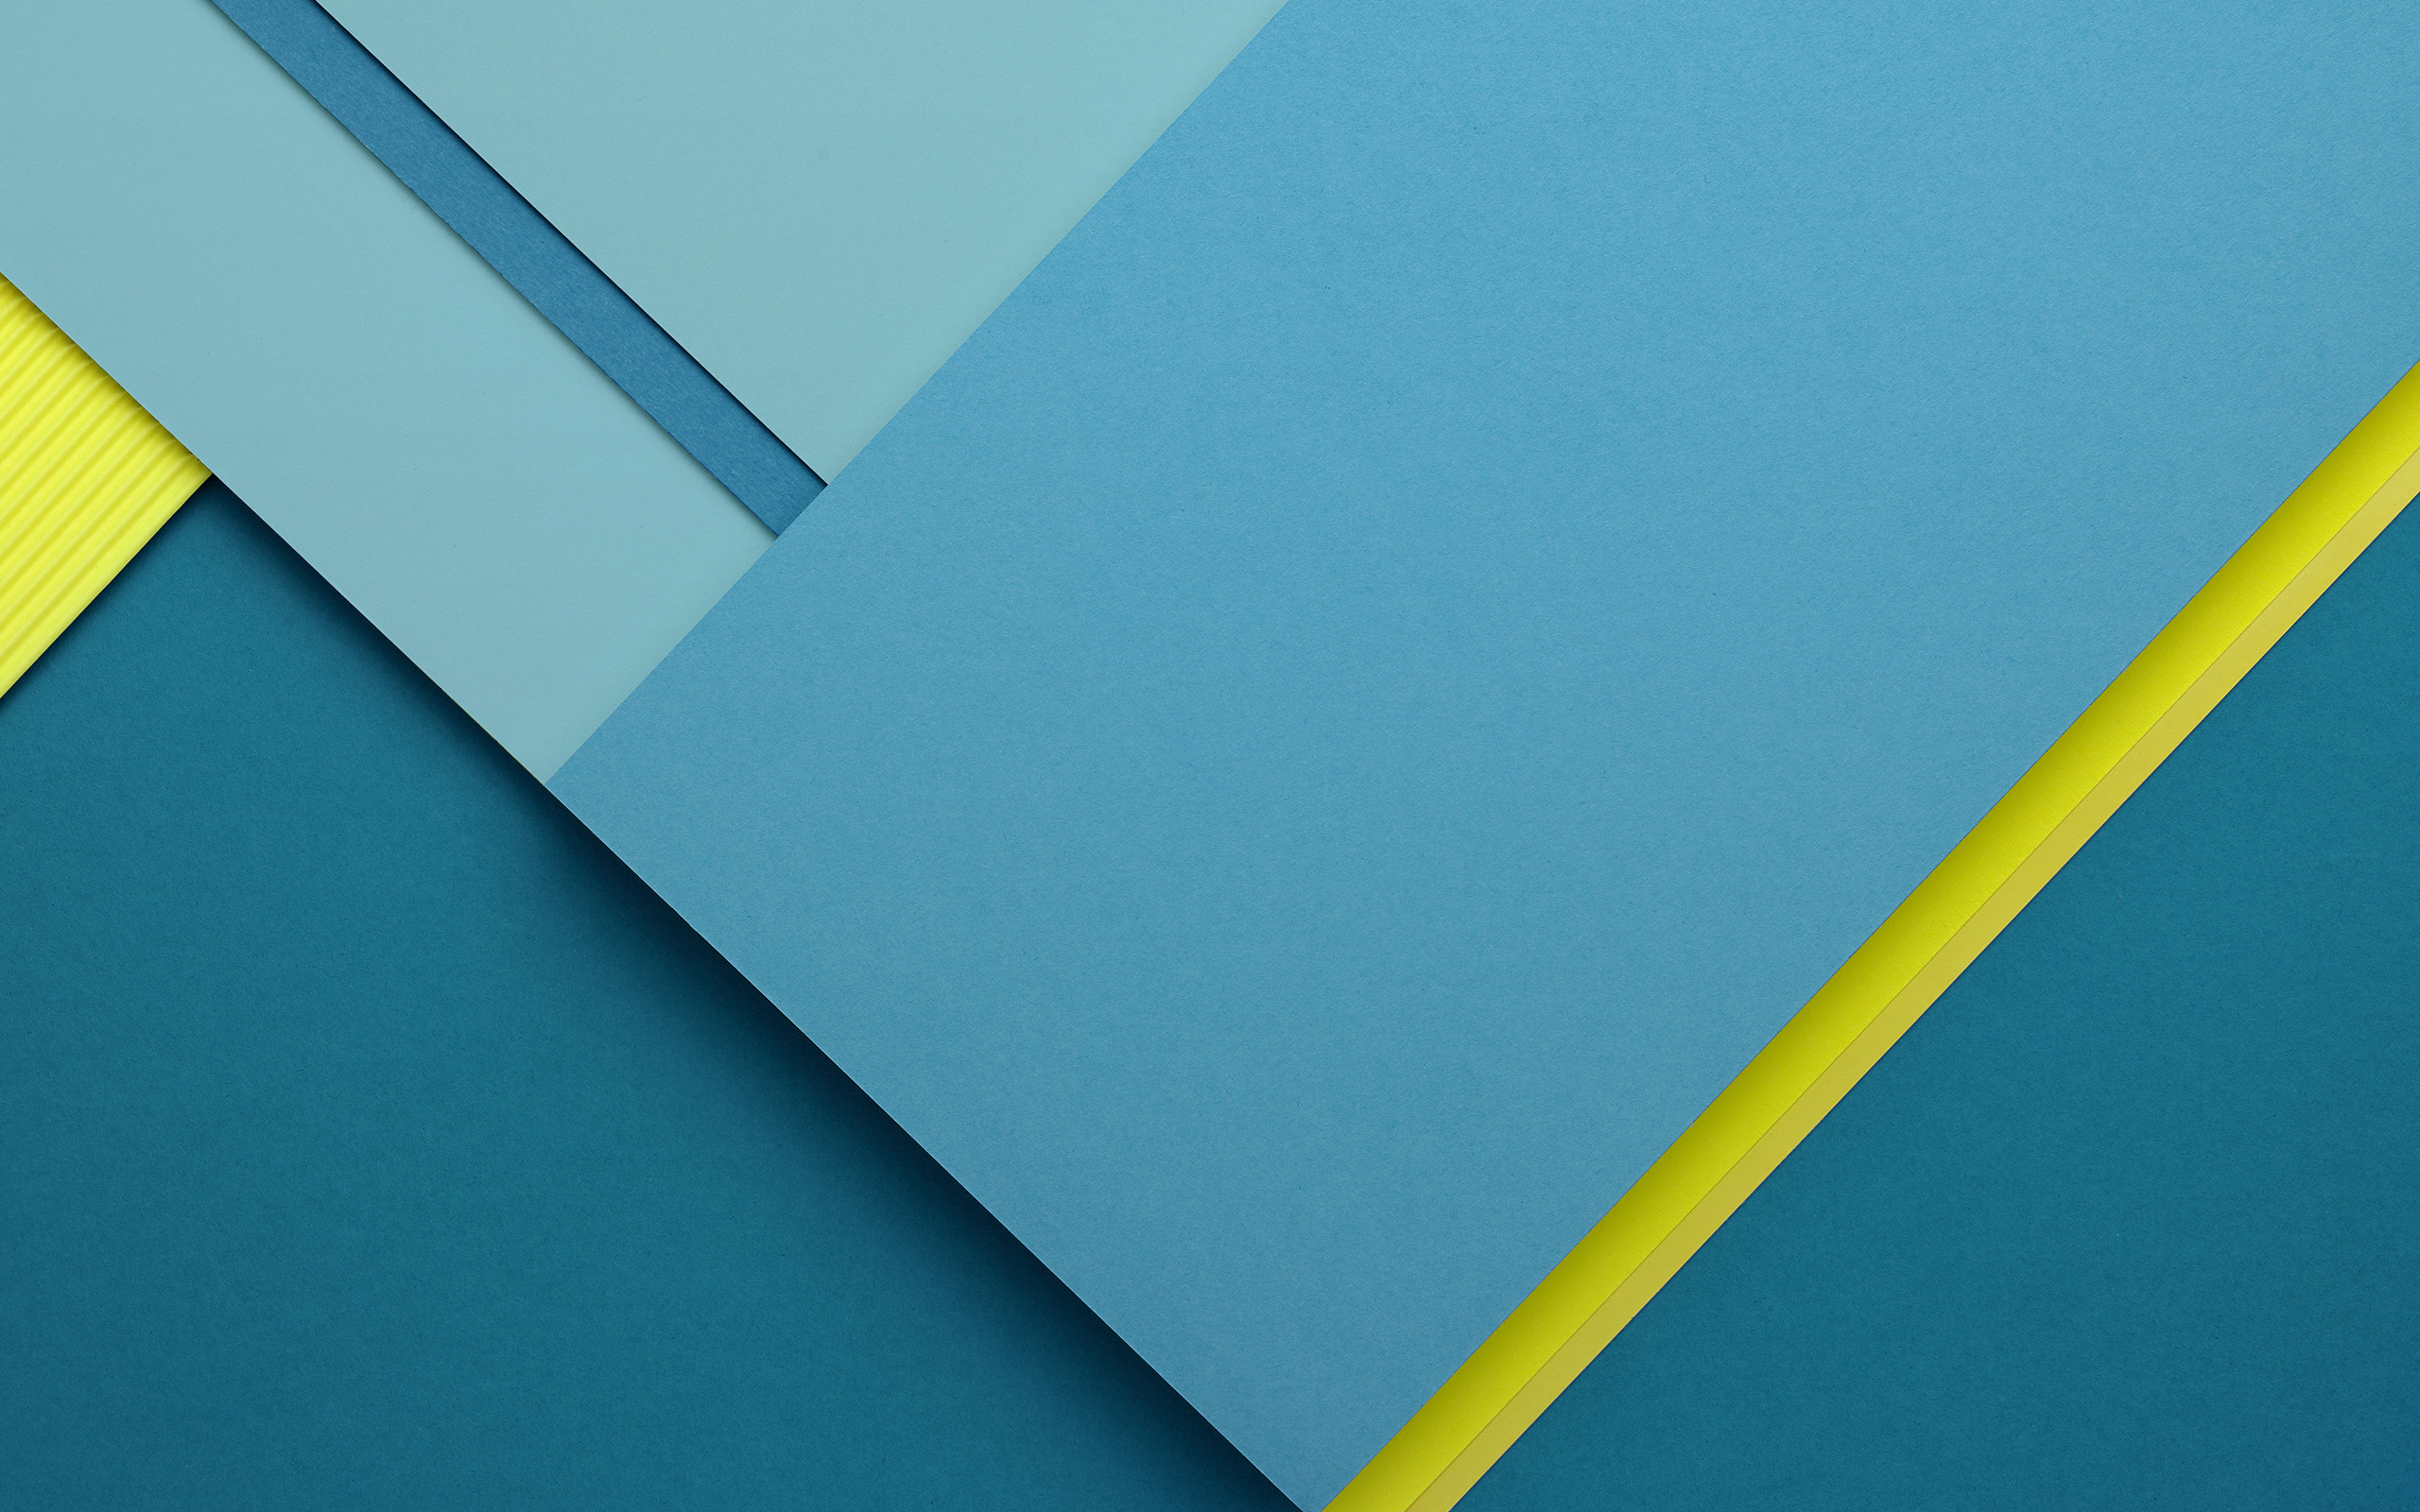 Here is the Material Design Default Wallpapers for Chromebooks [Download]